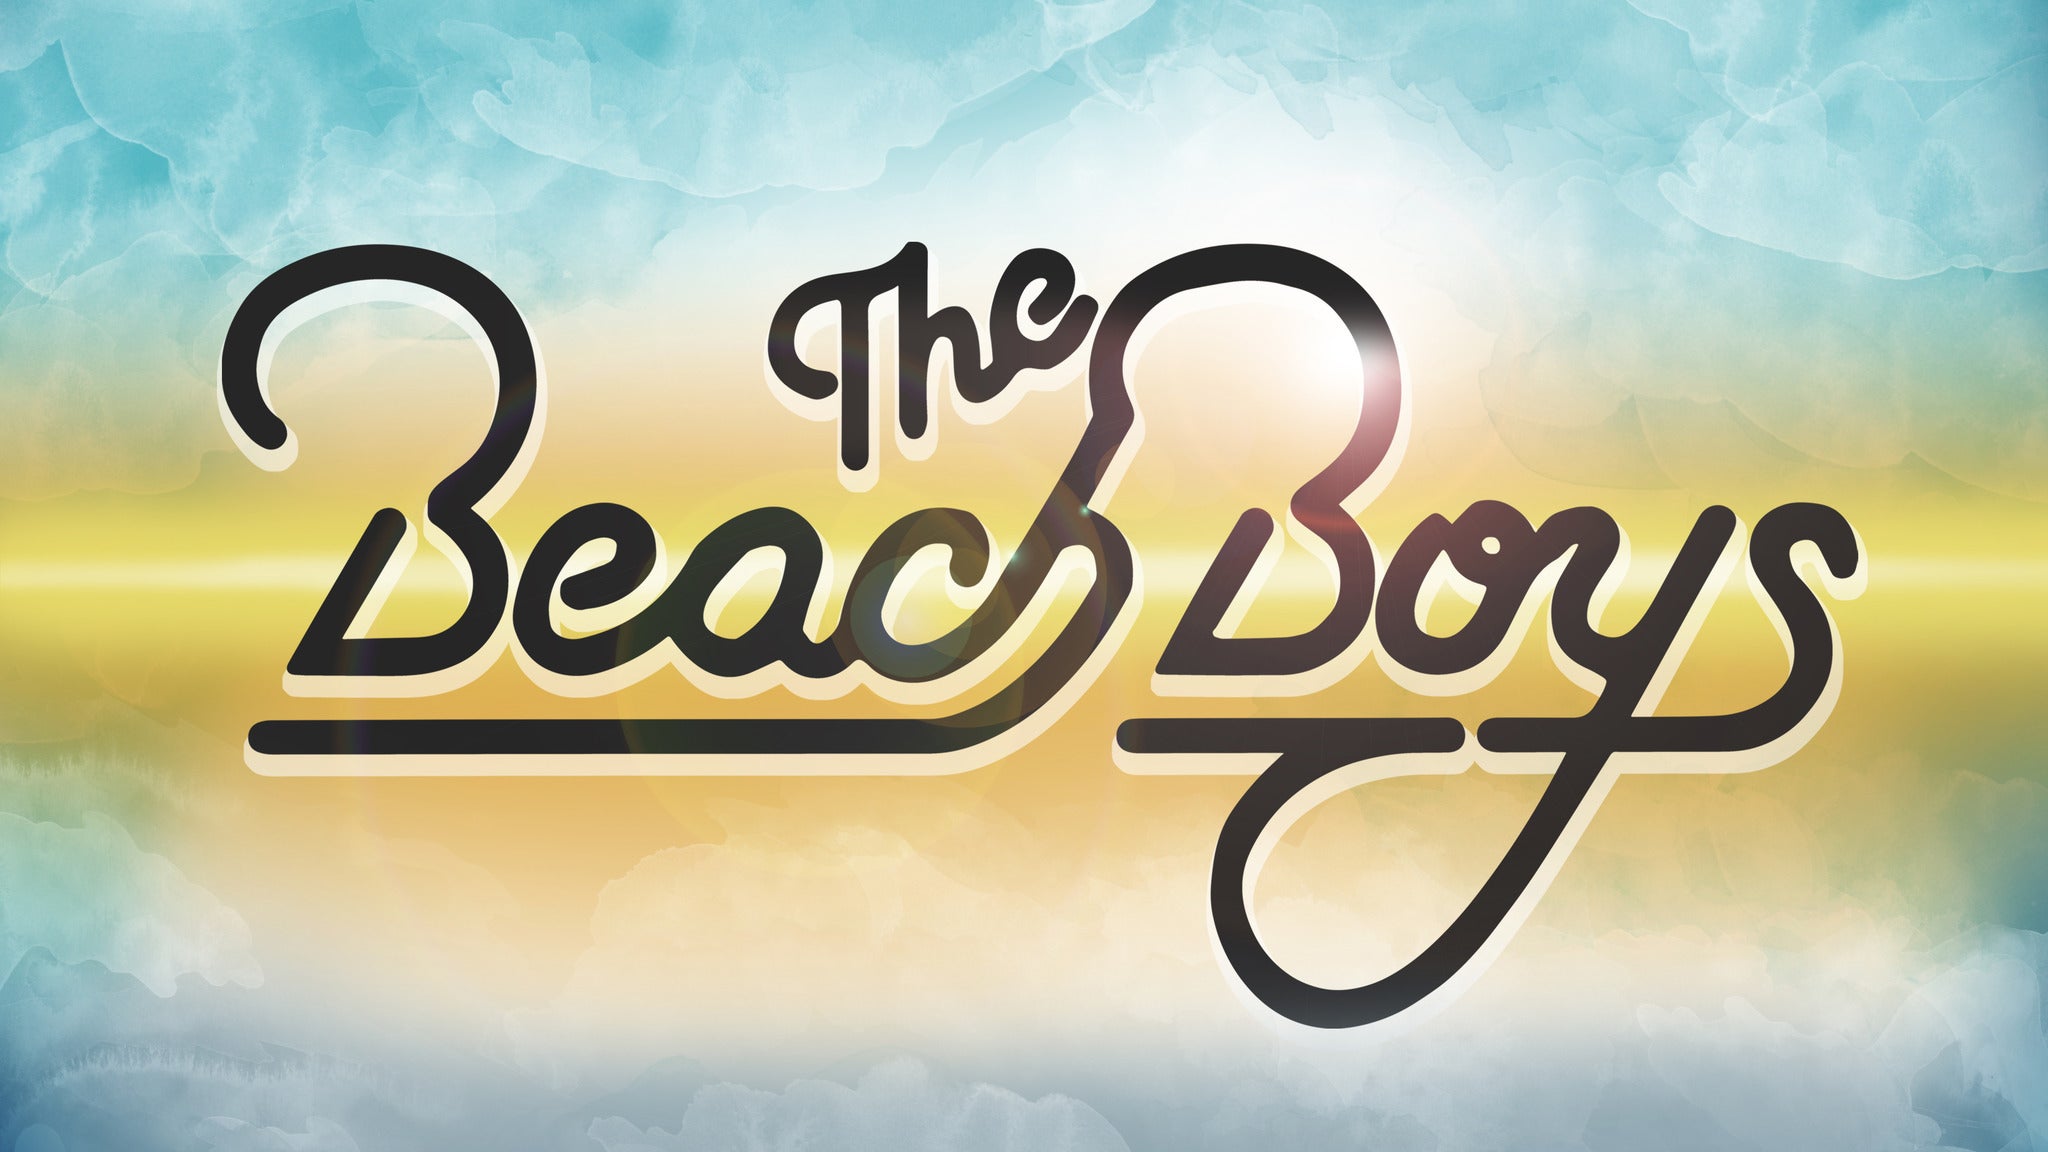 new presale code to Tis the Season with The Beach Boys ft the Holiday Vibrations Orchestra affordable tickets in Mashantucket at Premier Theater at Foxwoods Resort Casino